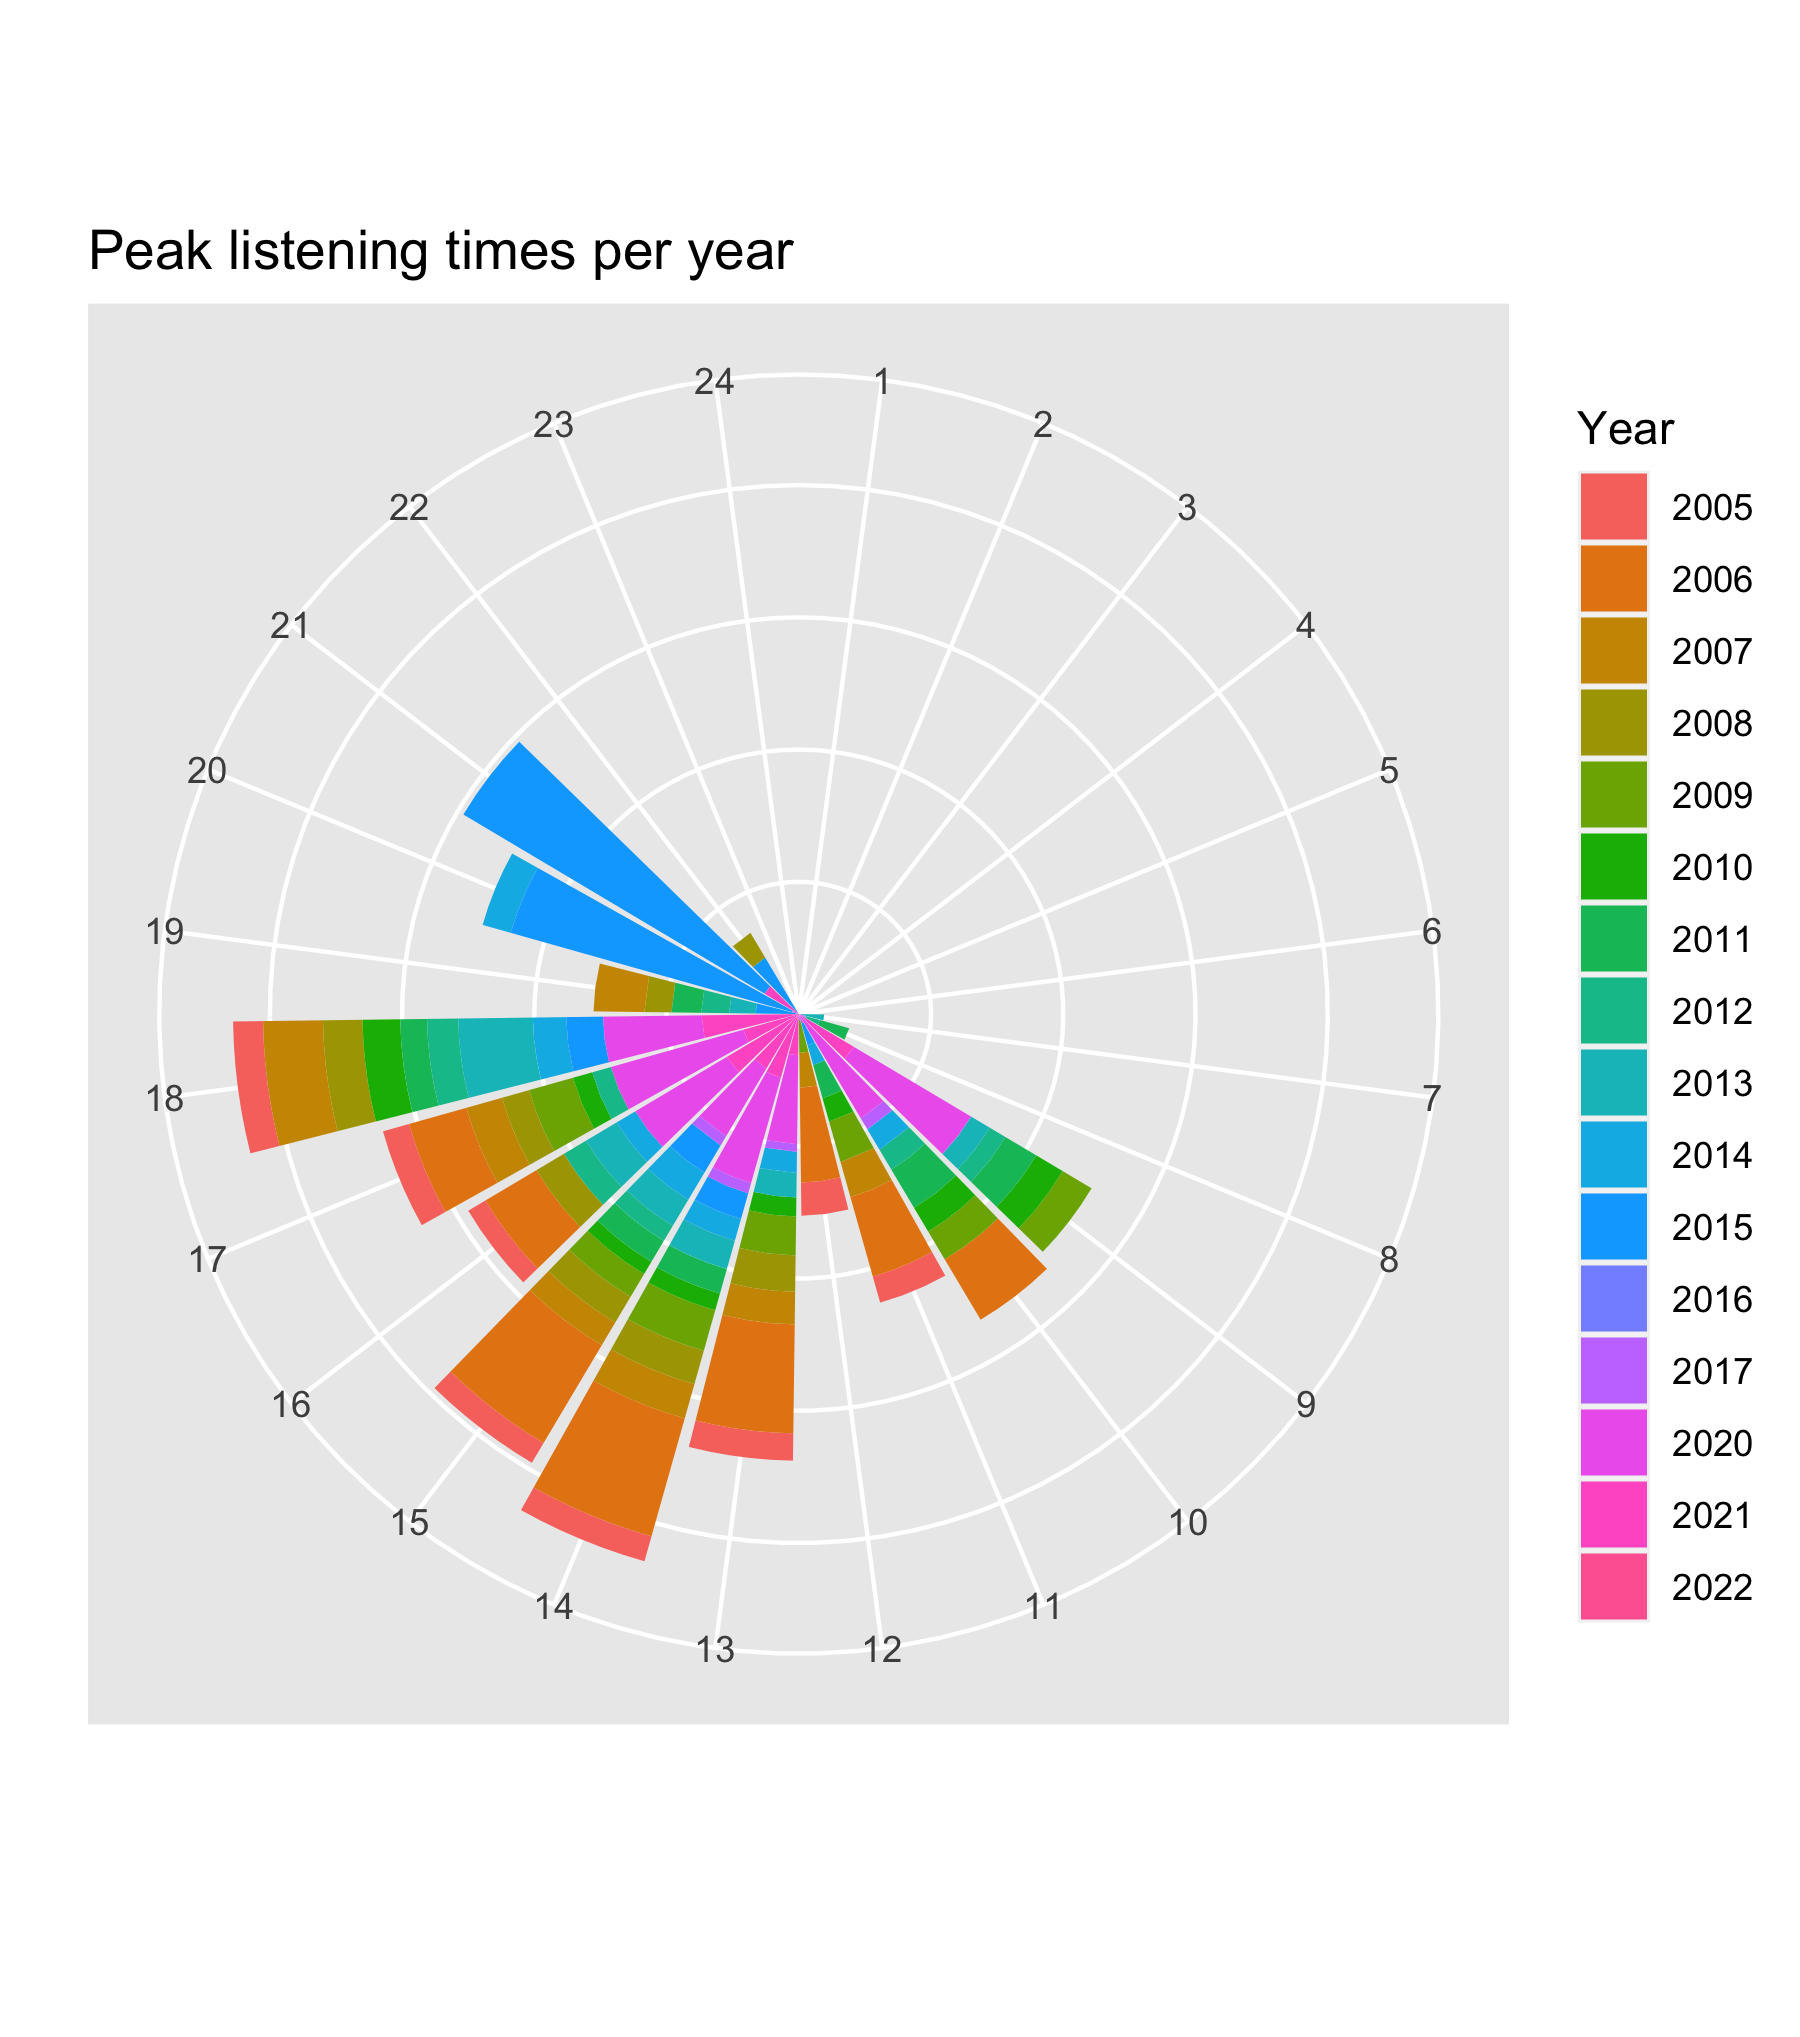 a colorful clock-like diagram showing a high amount of listening time over the years between about 8 am and 10 pm. The other angles of the clock are empty.